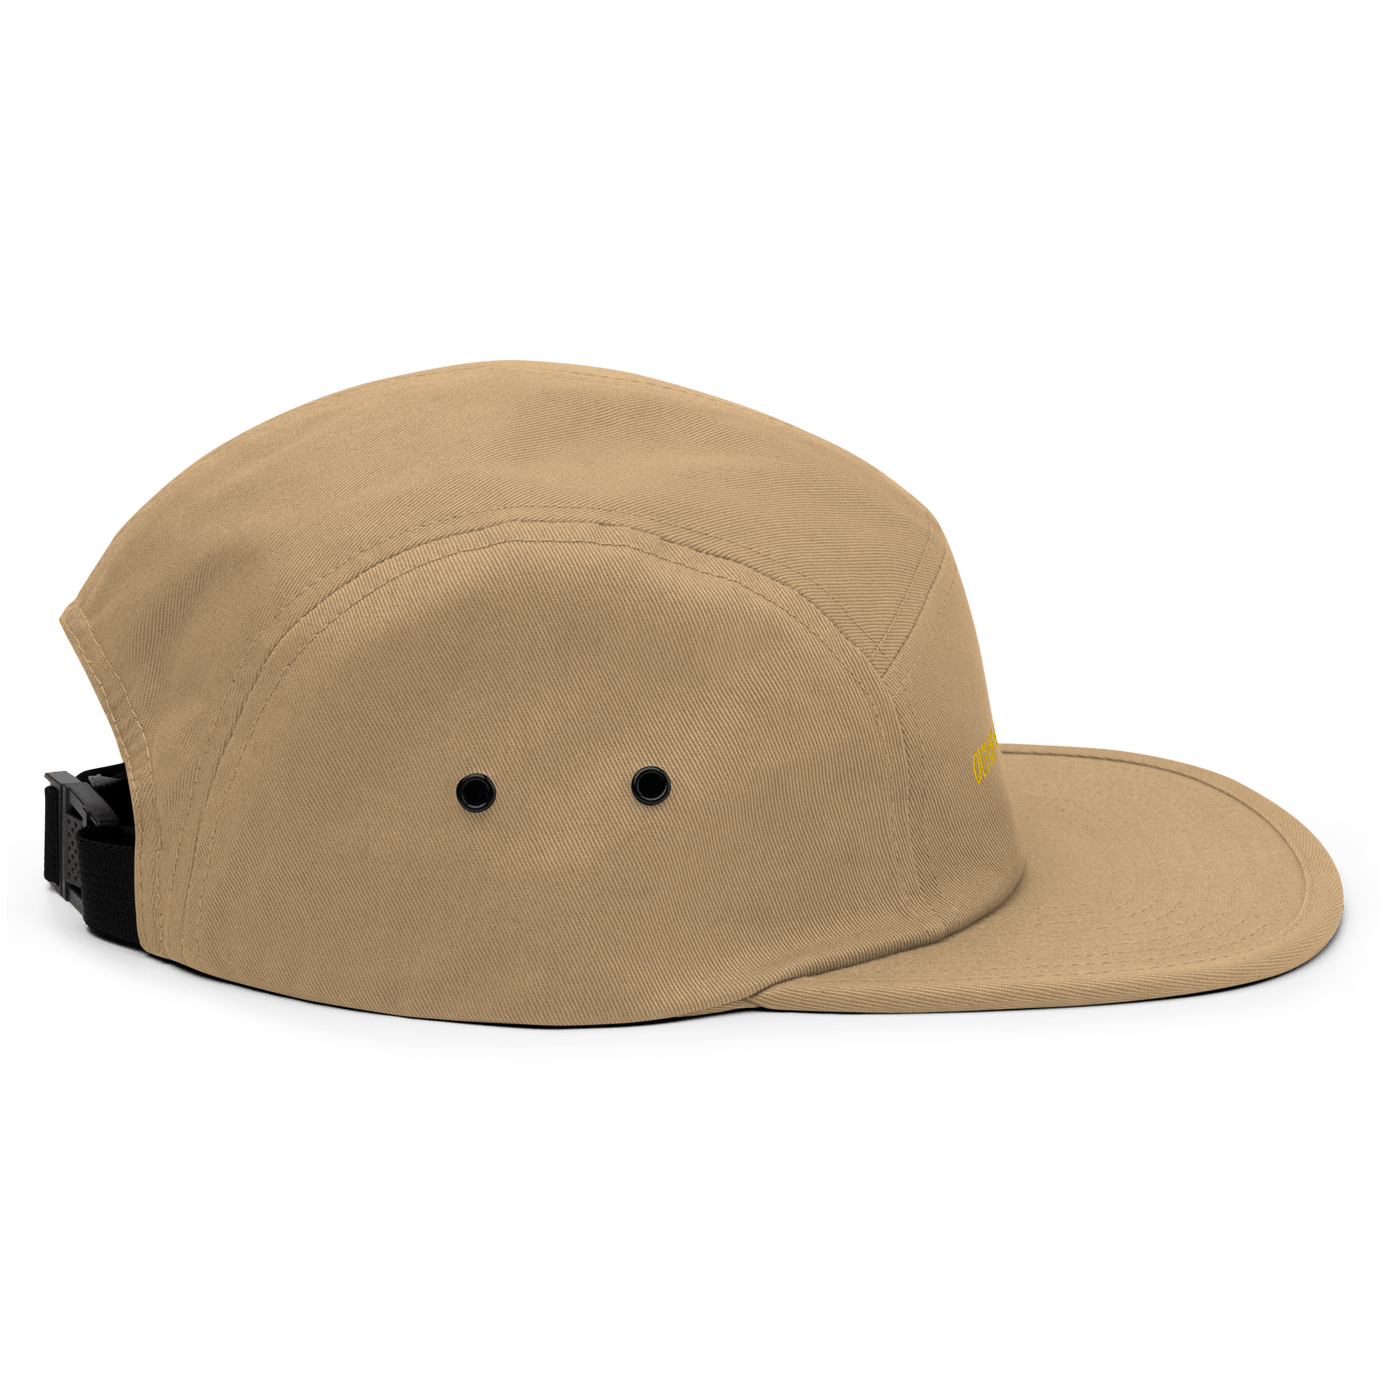 OUT OF OFFICE Five Panel Hat - Khaki - - Just Another Cap Store